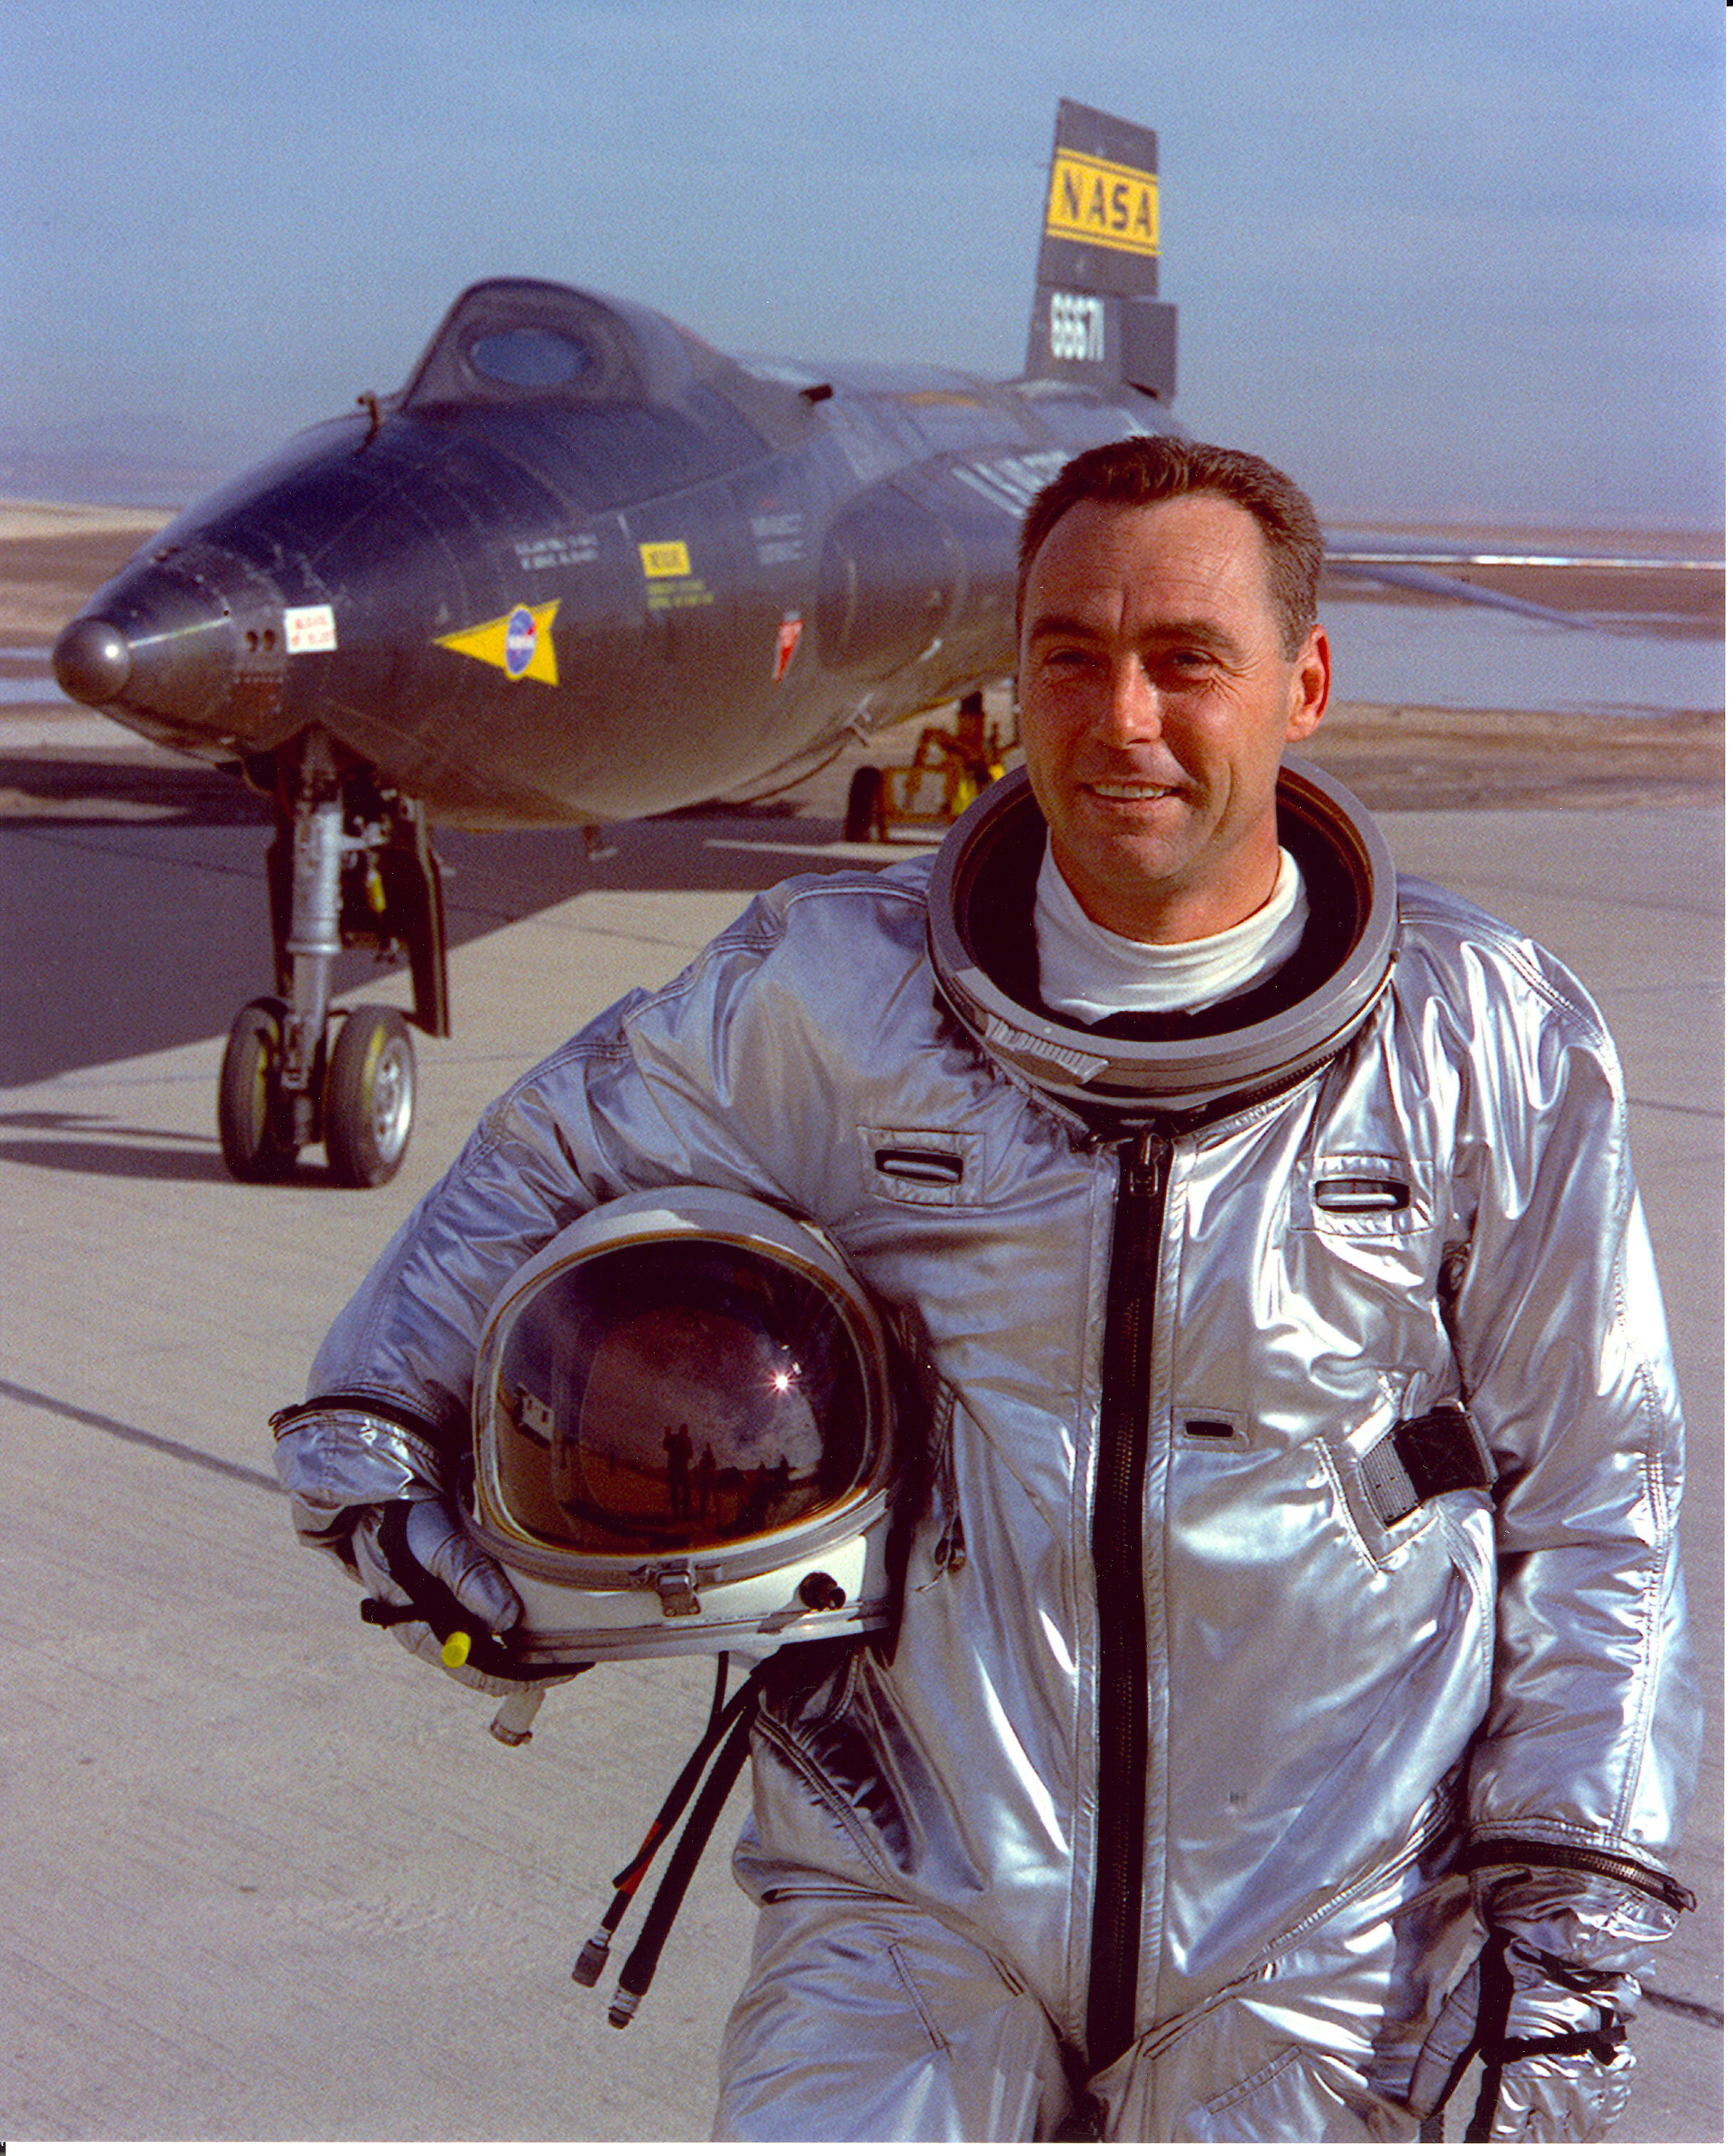 Major William J. Knight, U.S. Air Force, with the modified X-15A-2, 56-6671, at Edwards Air Force Base, California. Knight is wearing a David Clark Co. MC-2 full-pressure suit with an MA-3 helmet. (U.S. Air Force)